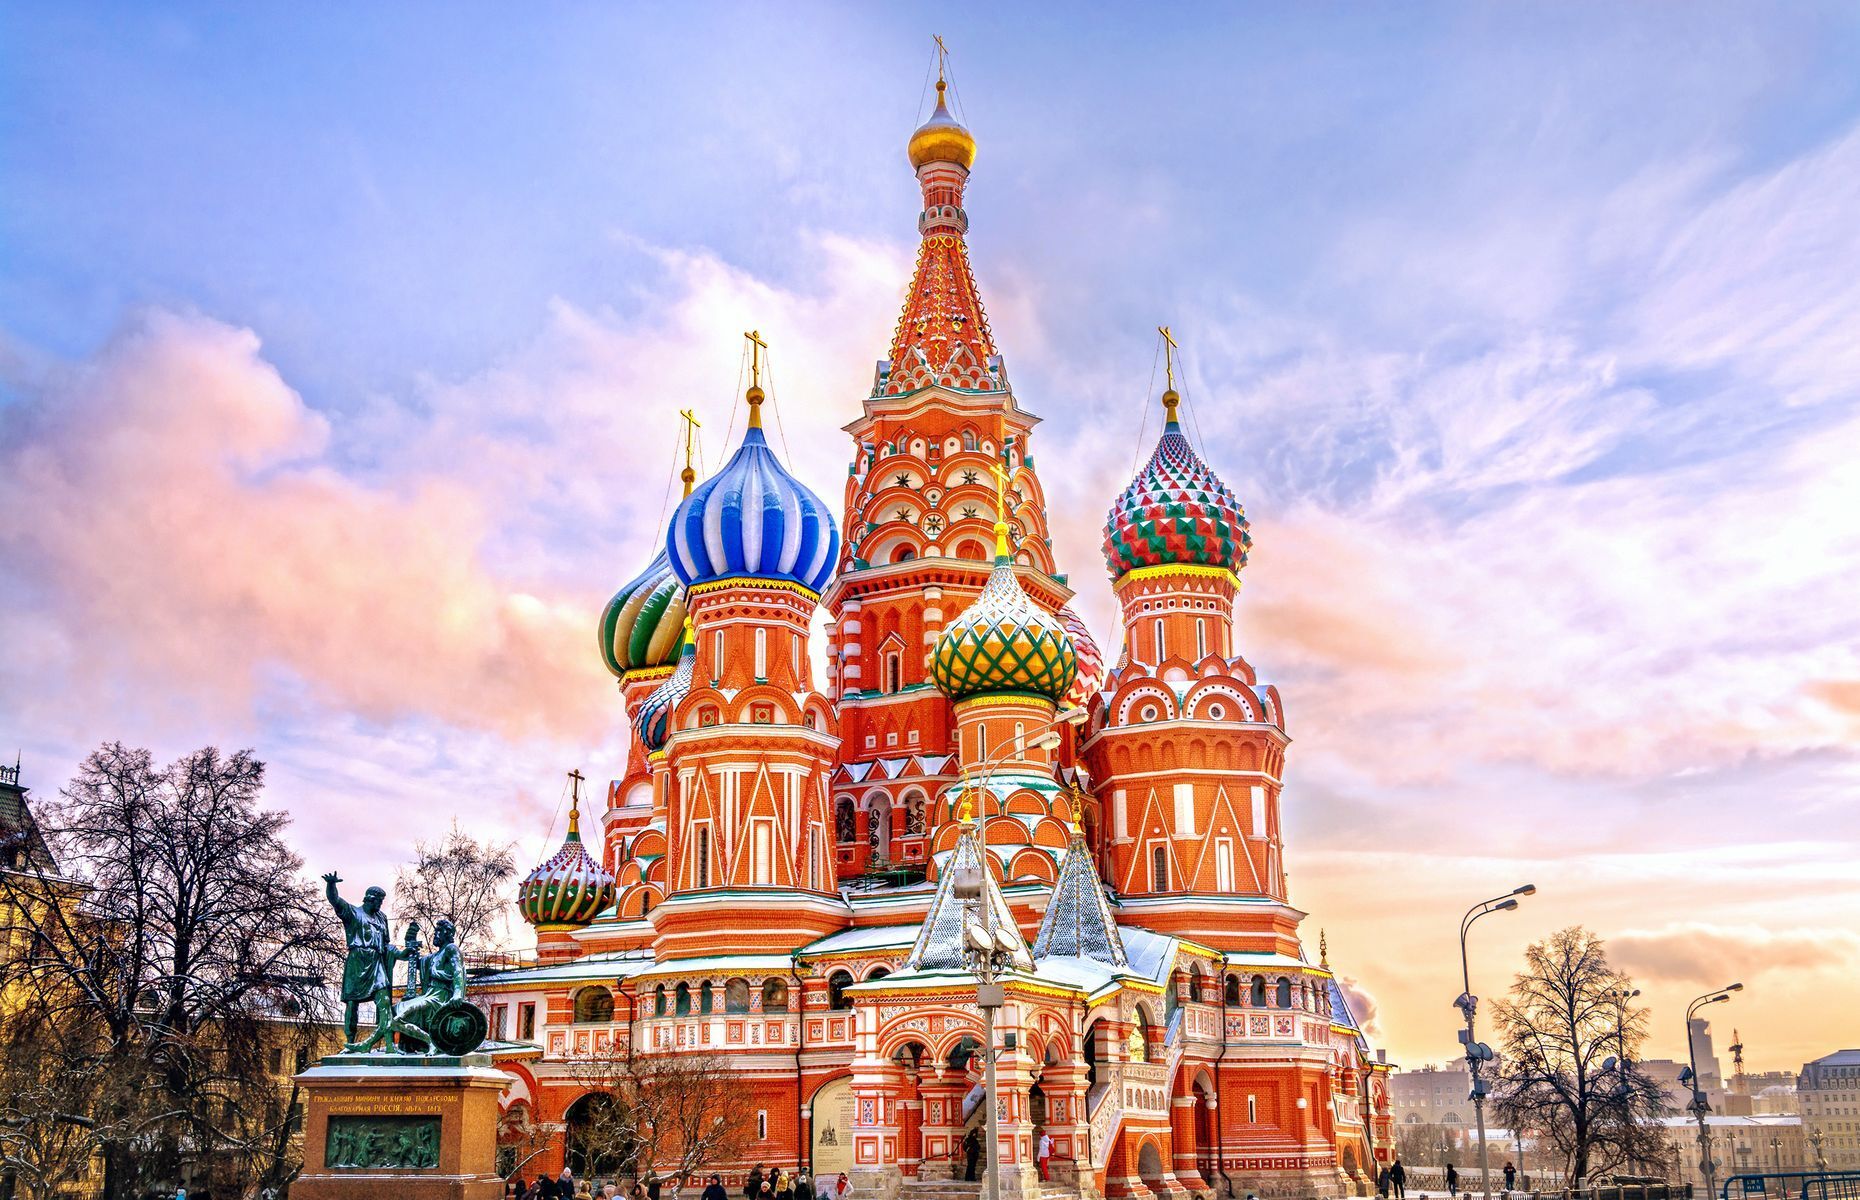 <p>Representative of traditional Russian architecture, with its wooden structure and bell towers topped with colourful bulbs, St. Basil’s Cathedral is <a href="https://www.medievalists.net/2021/05/st-basils-cathedral-medieval-russias-iconic-building/" rel="noreferrer noopener">one of Moscow’s most iconic sites</a>. Tsar Ivan IV ordered the construction of this Red Square gem in the 16th century to celebrate the conquest of Kazan. According to legend, Ivan (who wasn’t called “The Terrible” for no reason!) then had the architects’ eyes <a href="https://www.rbth.com/arts/2016/07/12/8-facts-about-russias-best-known-church-st-basils-cathedral_611023" rel="noreferrer noopener">gouged out</a> to prevent them from producing similar works.</p>